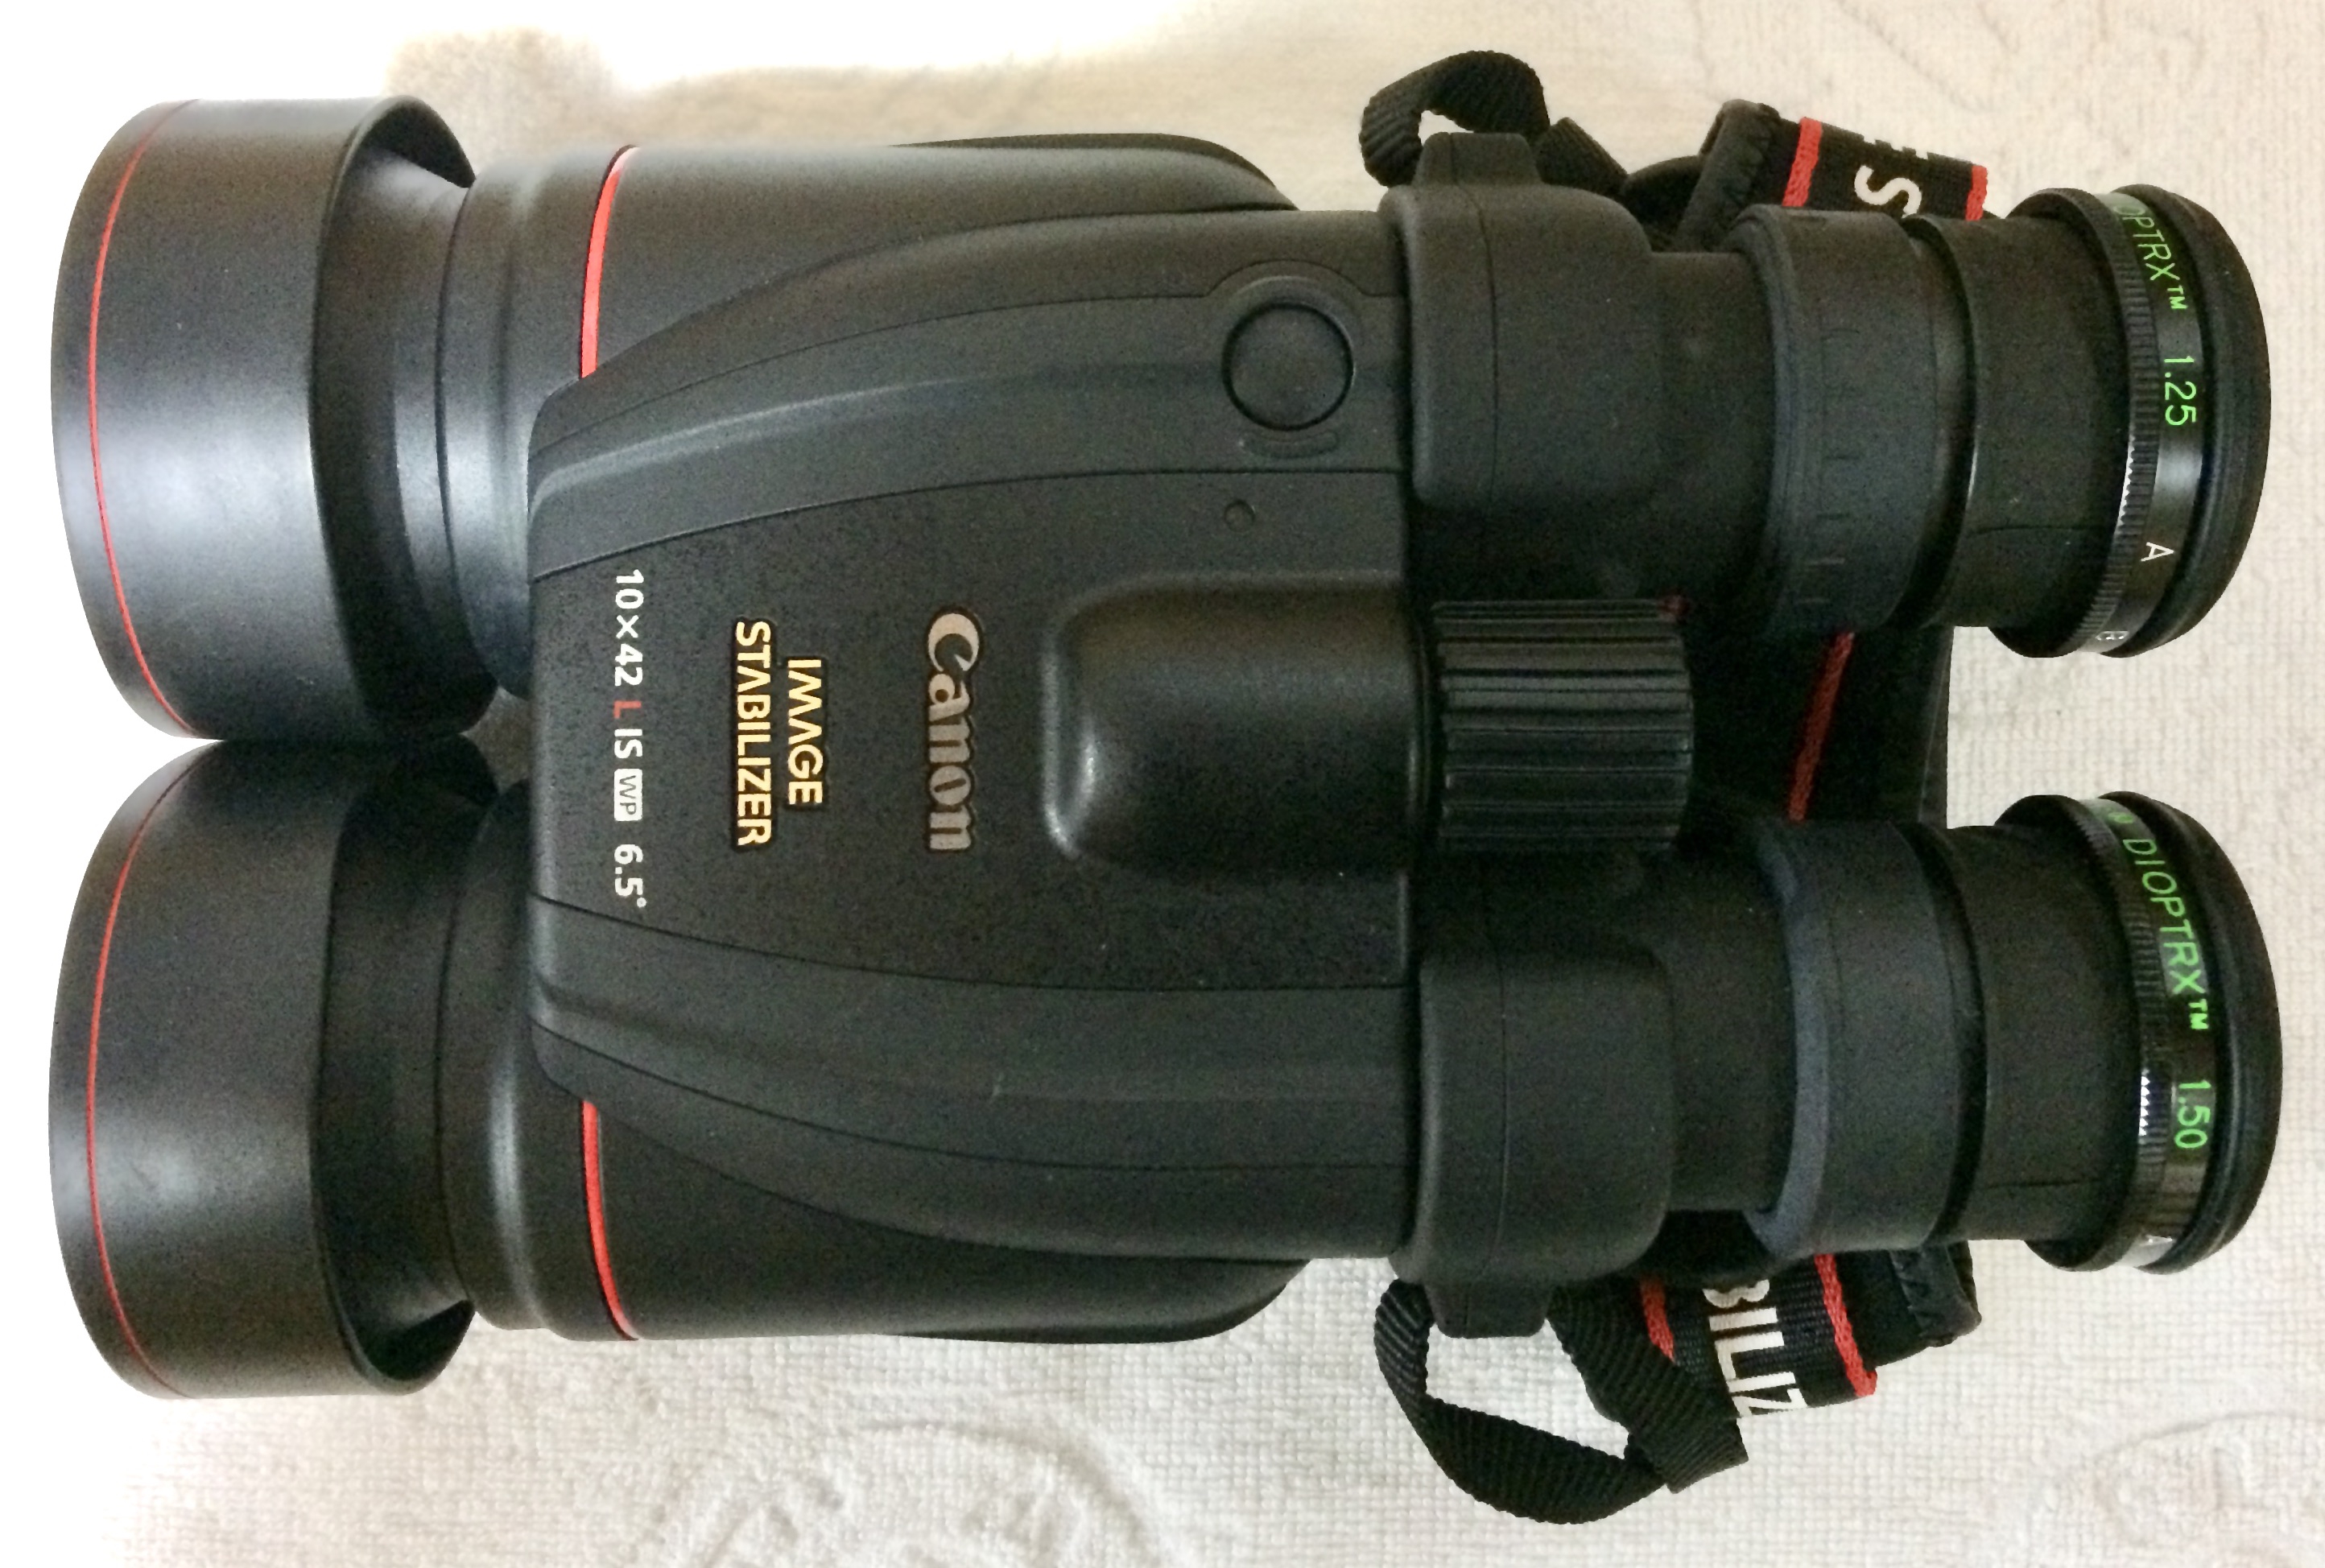 Canon 10×42L IS WP | 中村鏡とクック25cm望遠鏡